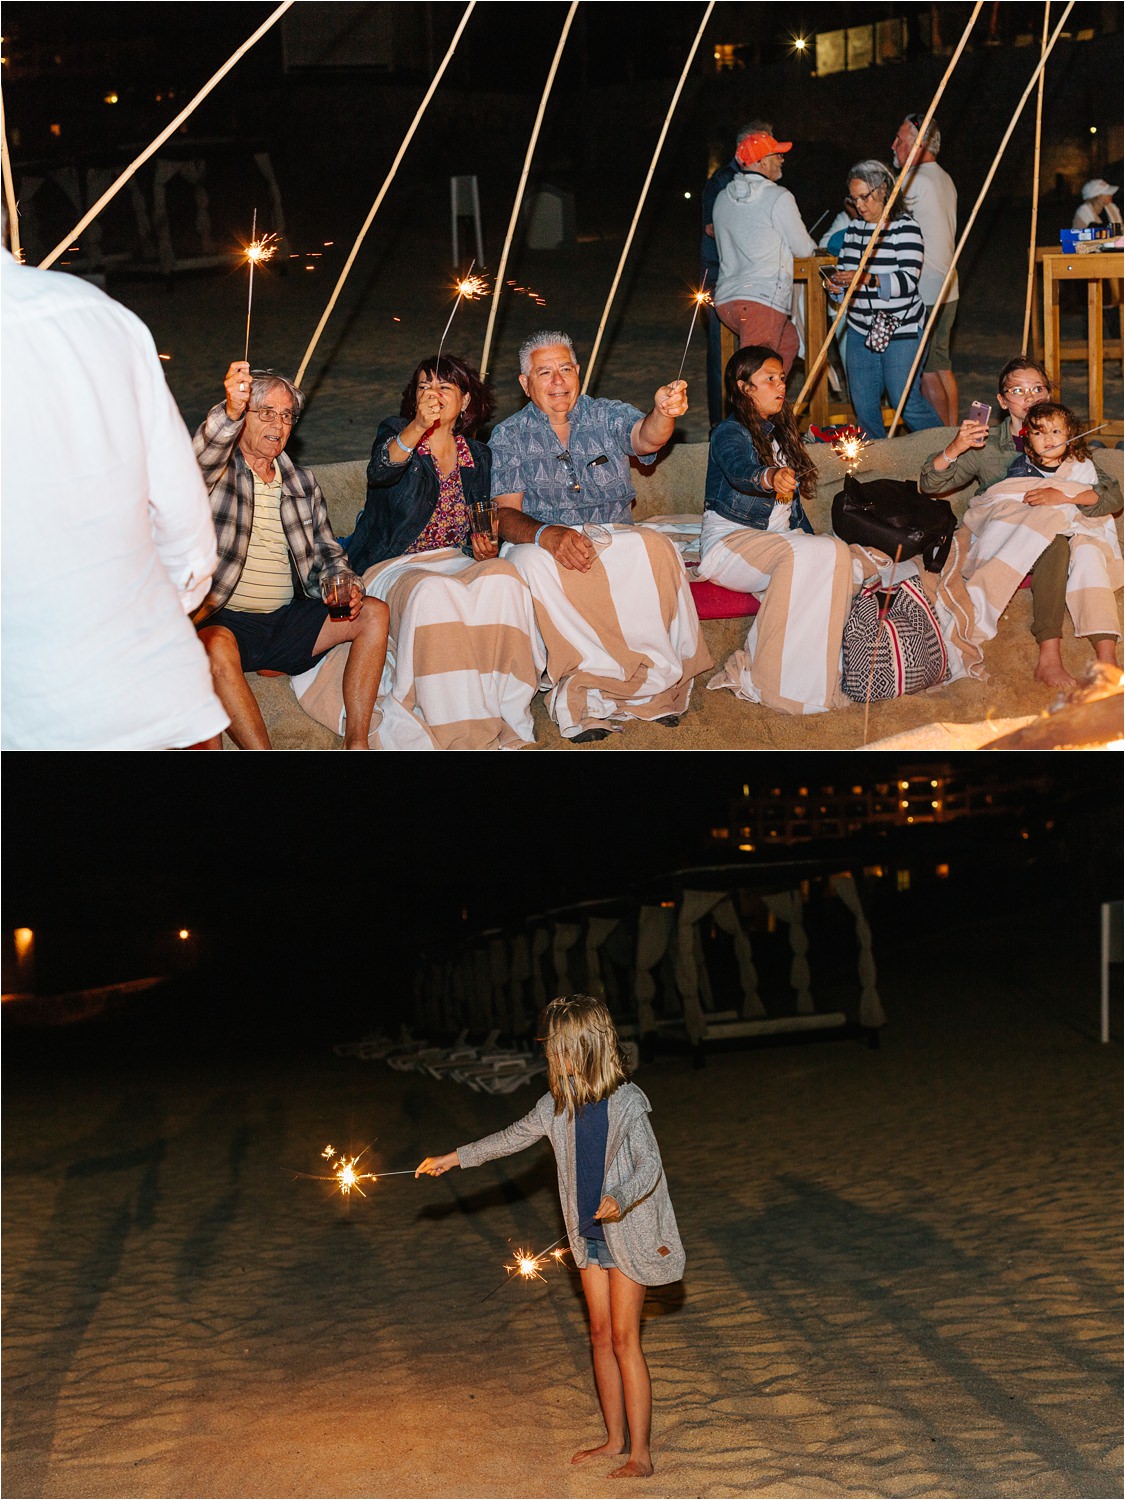 Wedding Bonfire in Cabo San Lucas on the beach - https://brittneyhannonphotography.com